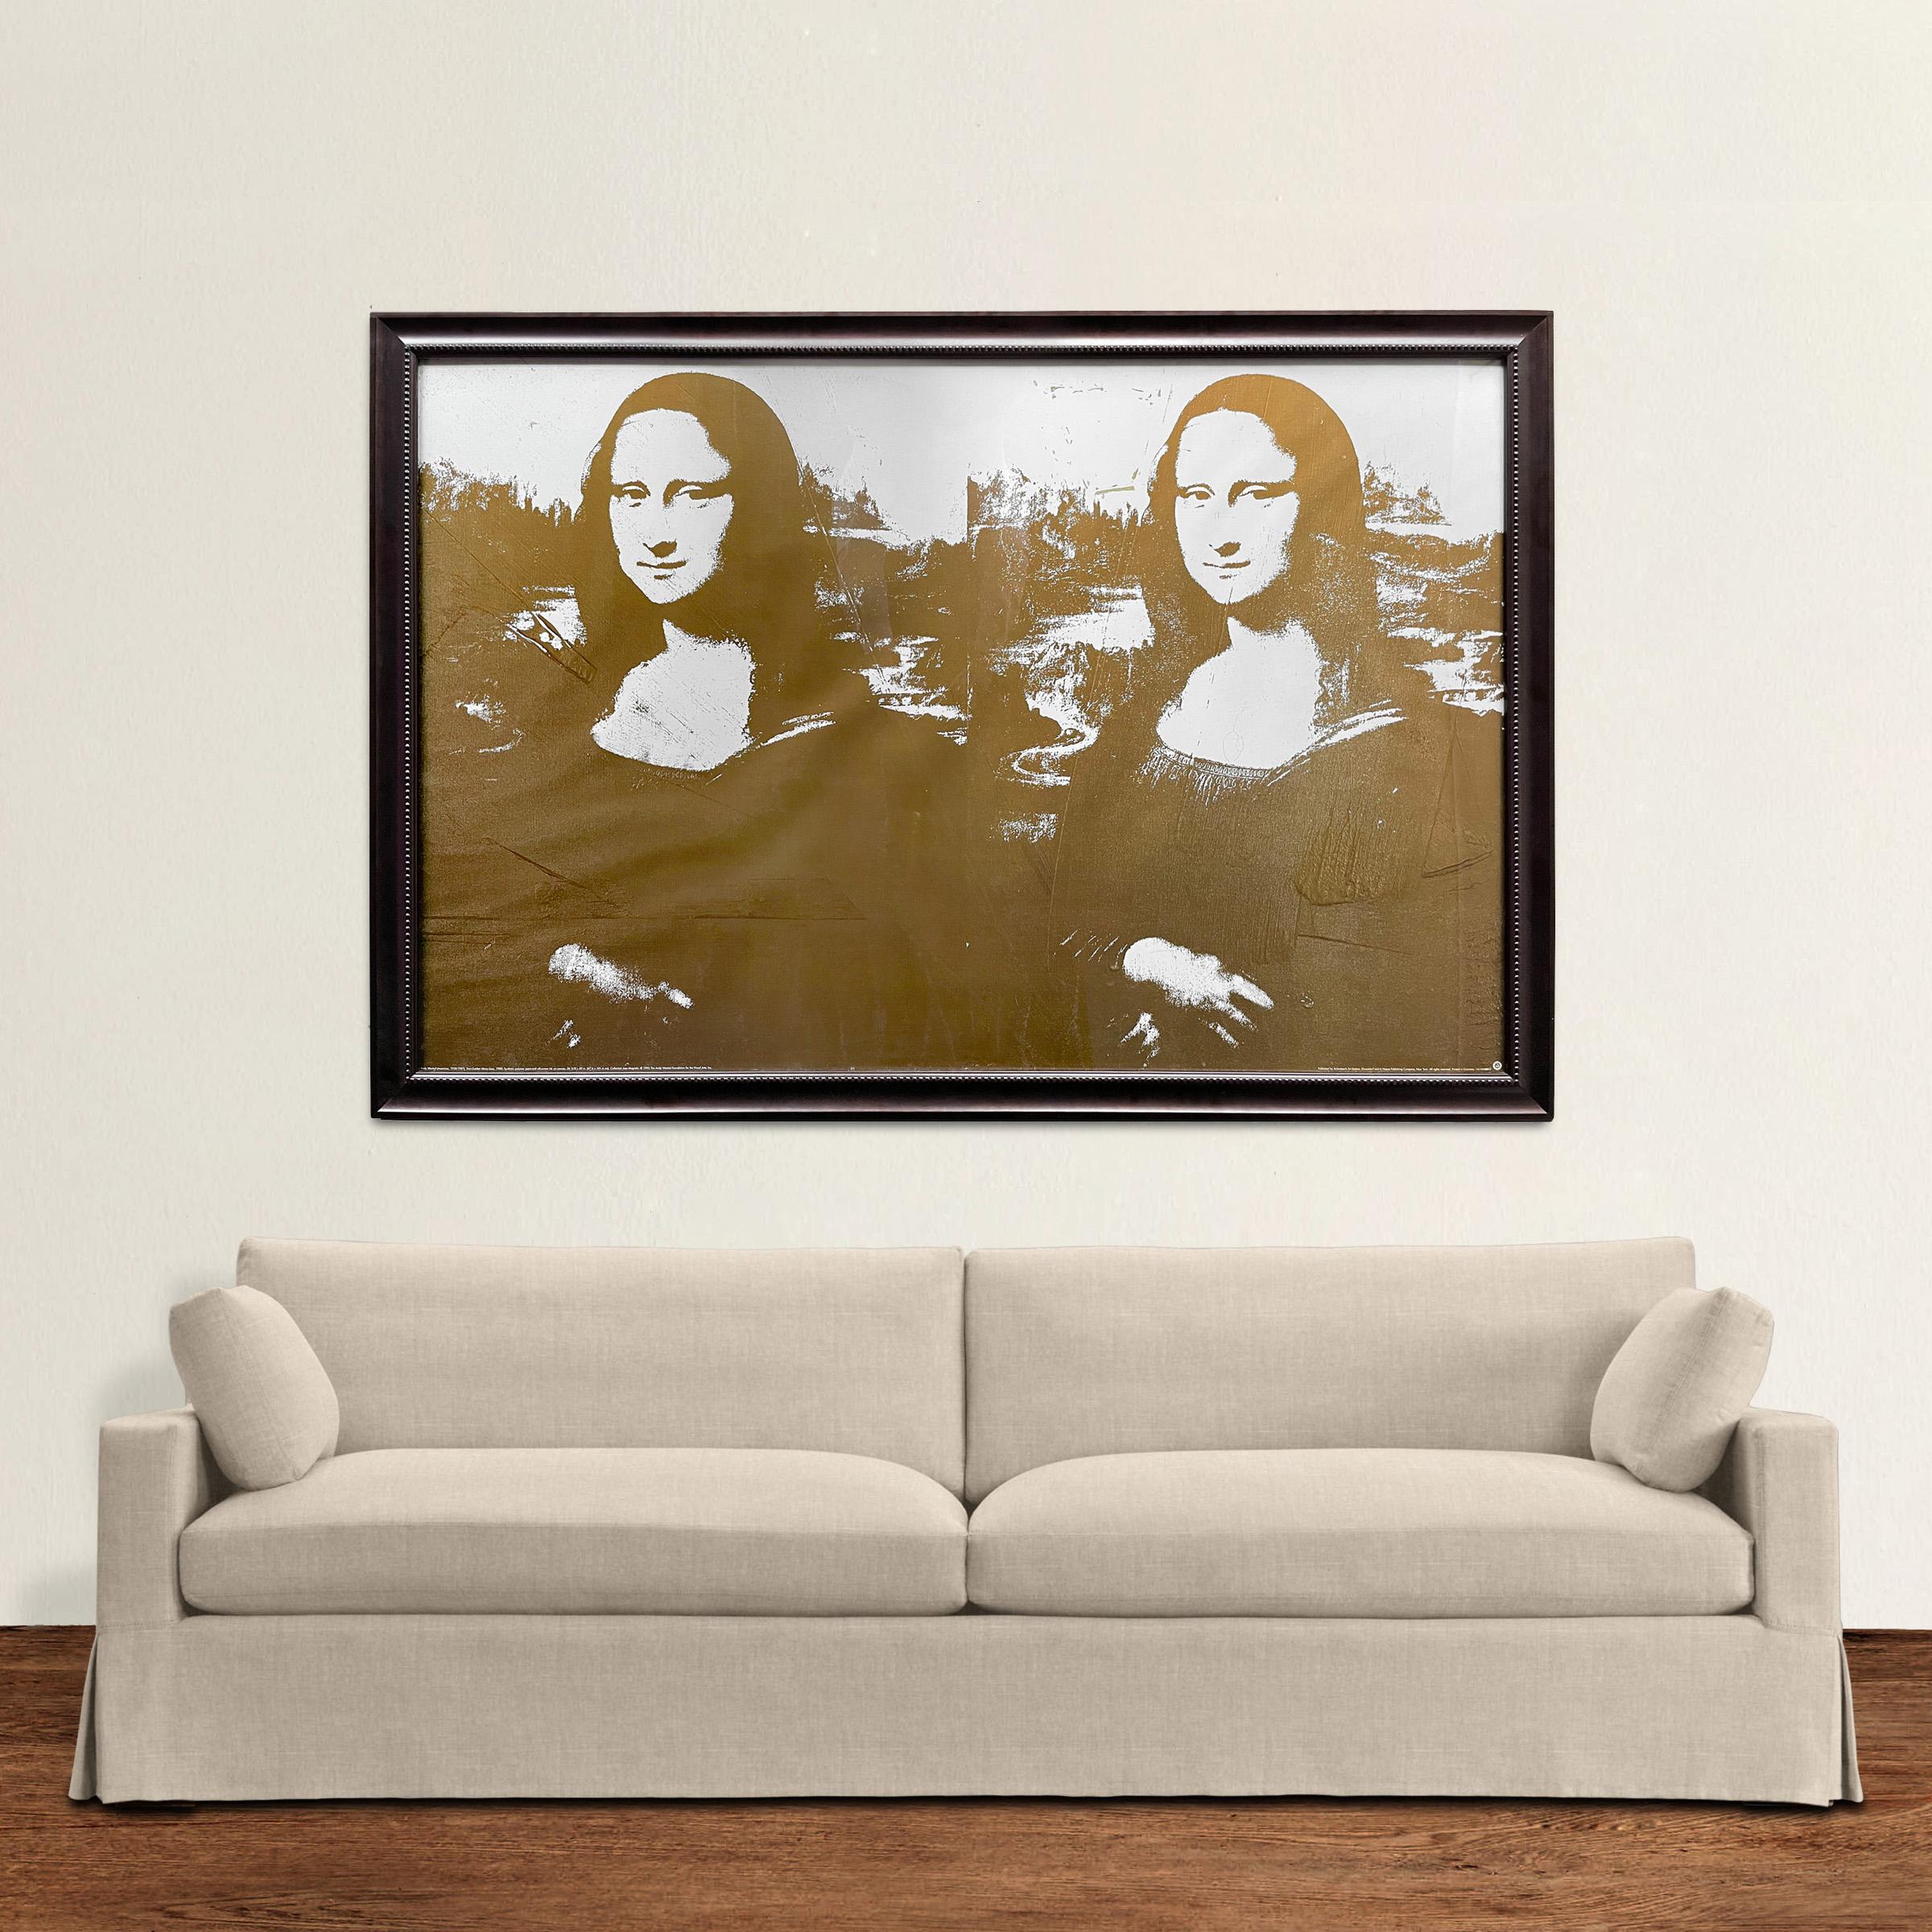 A striking limited edition 'Two Golden Mona Lisas' lithograph by Andy Warhol, printed by the Andy Warhol Foundation for the Visual Arts, Inc. in 1993. The original painting was complete by Warhol in 1980. The image is created using metallic ink on